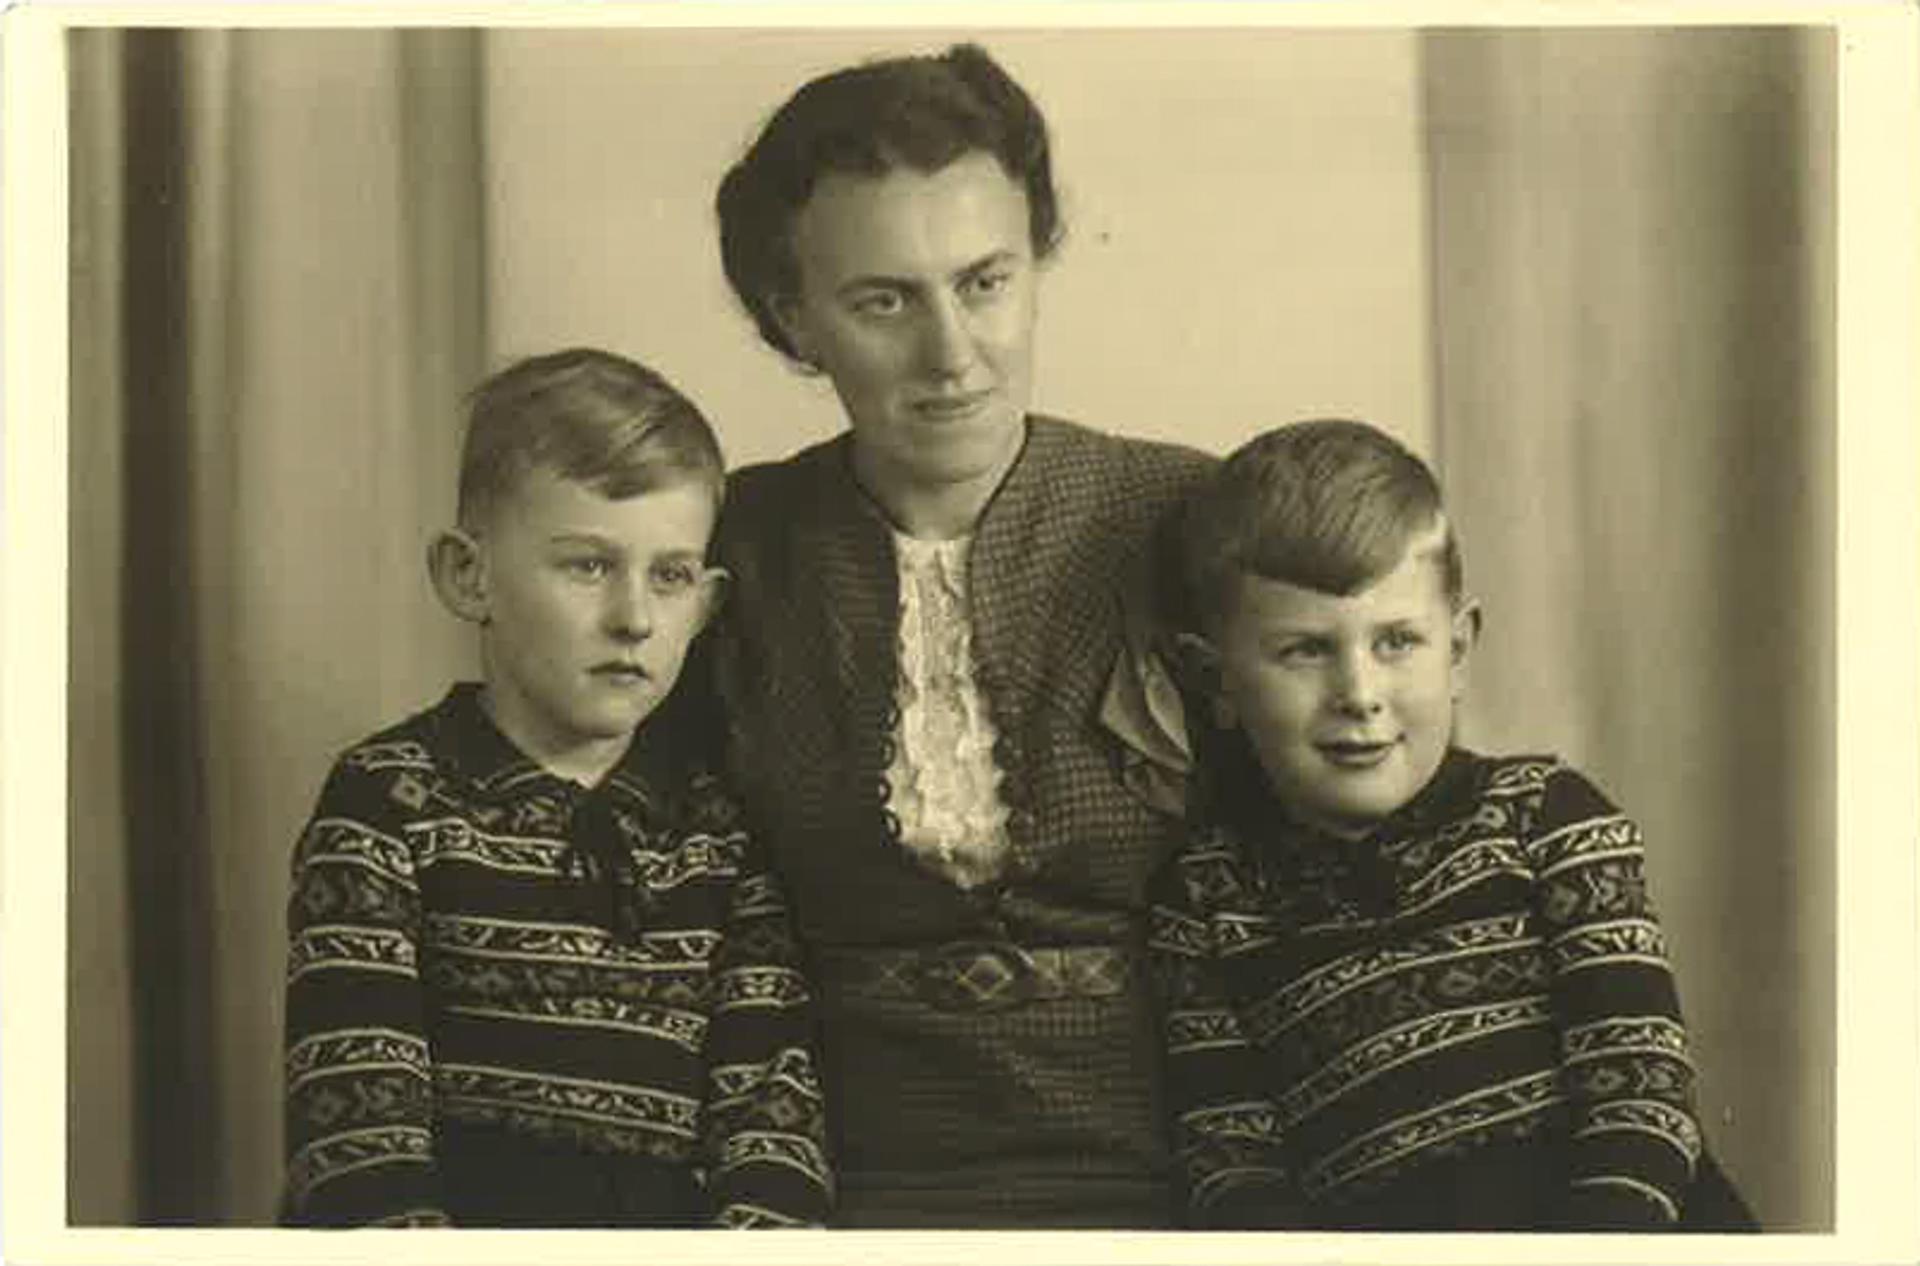 Harald Rose at age 5 (to the right) with his mother Anna-Luise and his two year older brother